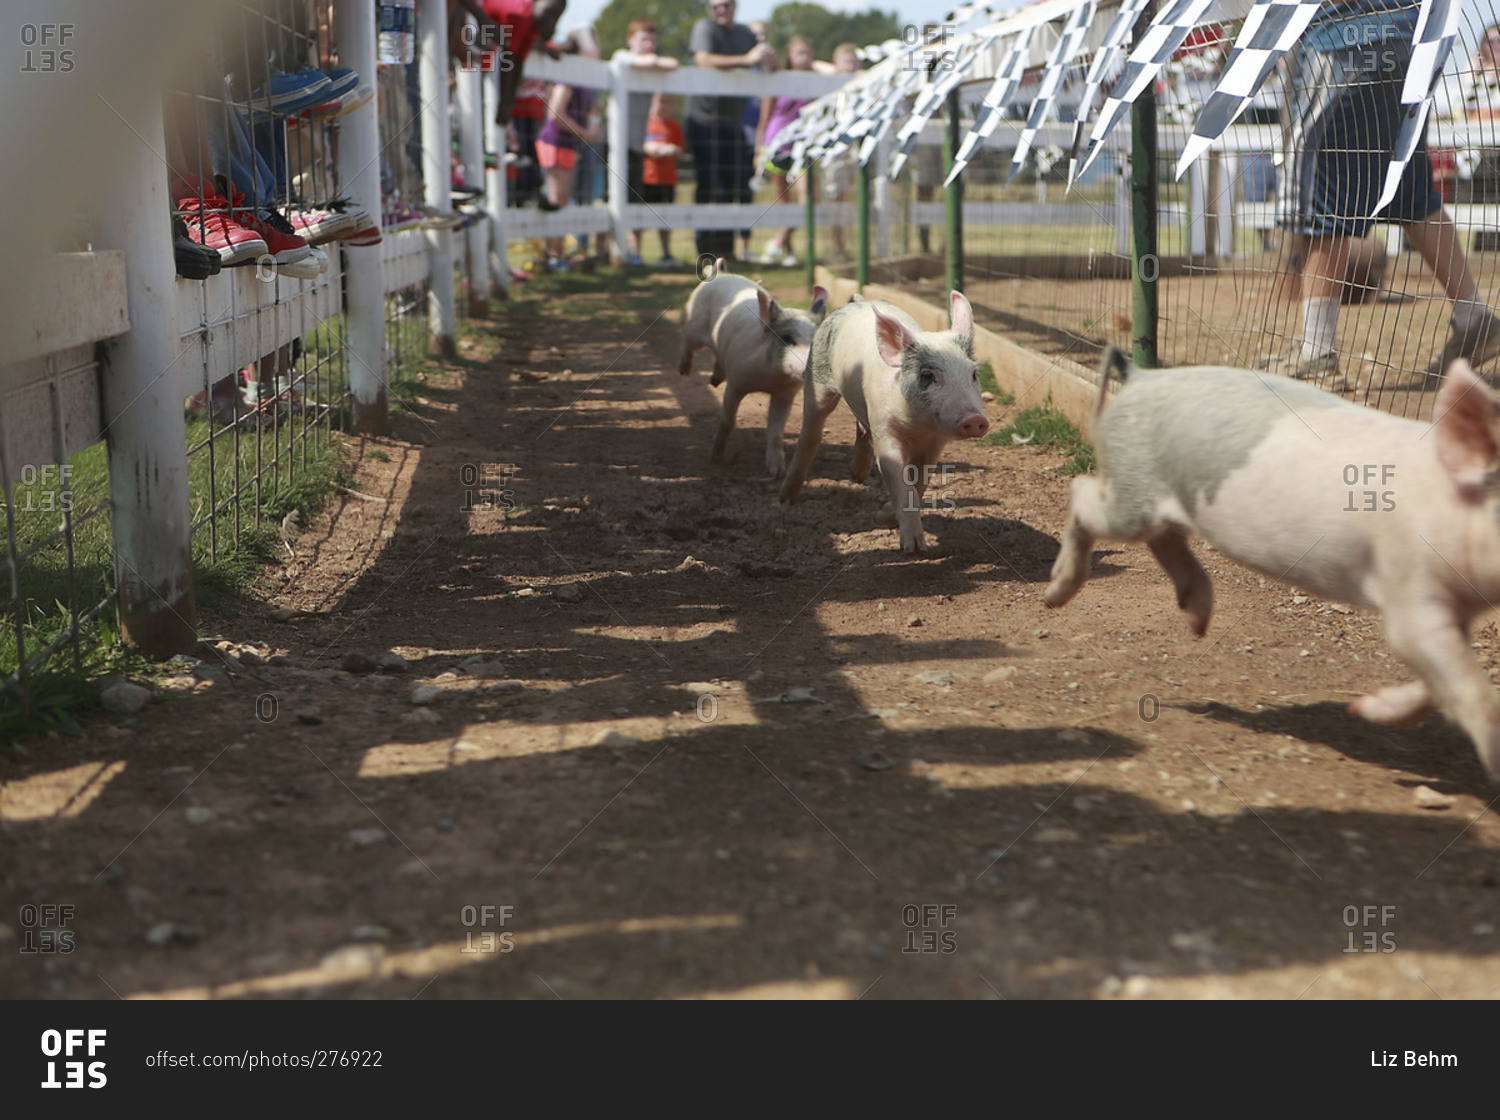 Piglets running in a race at country fair